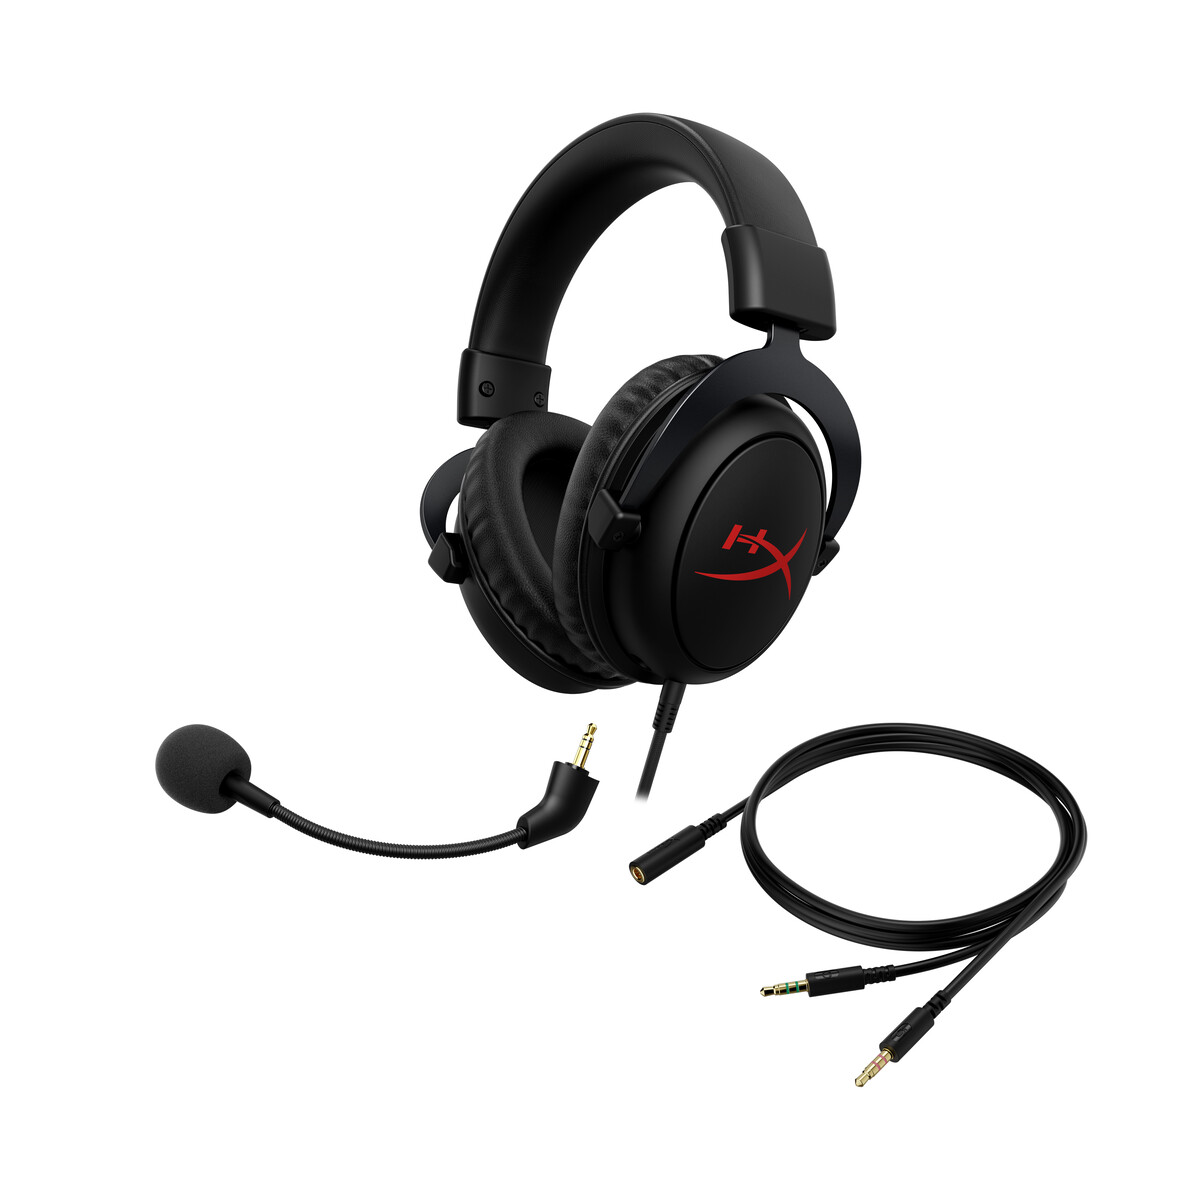 bestikke Erobrer Panorama HyperX Cloud Core Gaming Headset: Budget gaming headset launched with a  Discord and TeamSpeak certified microphone - NotebookCheck.net News